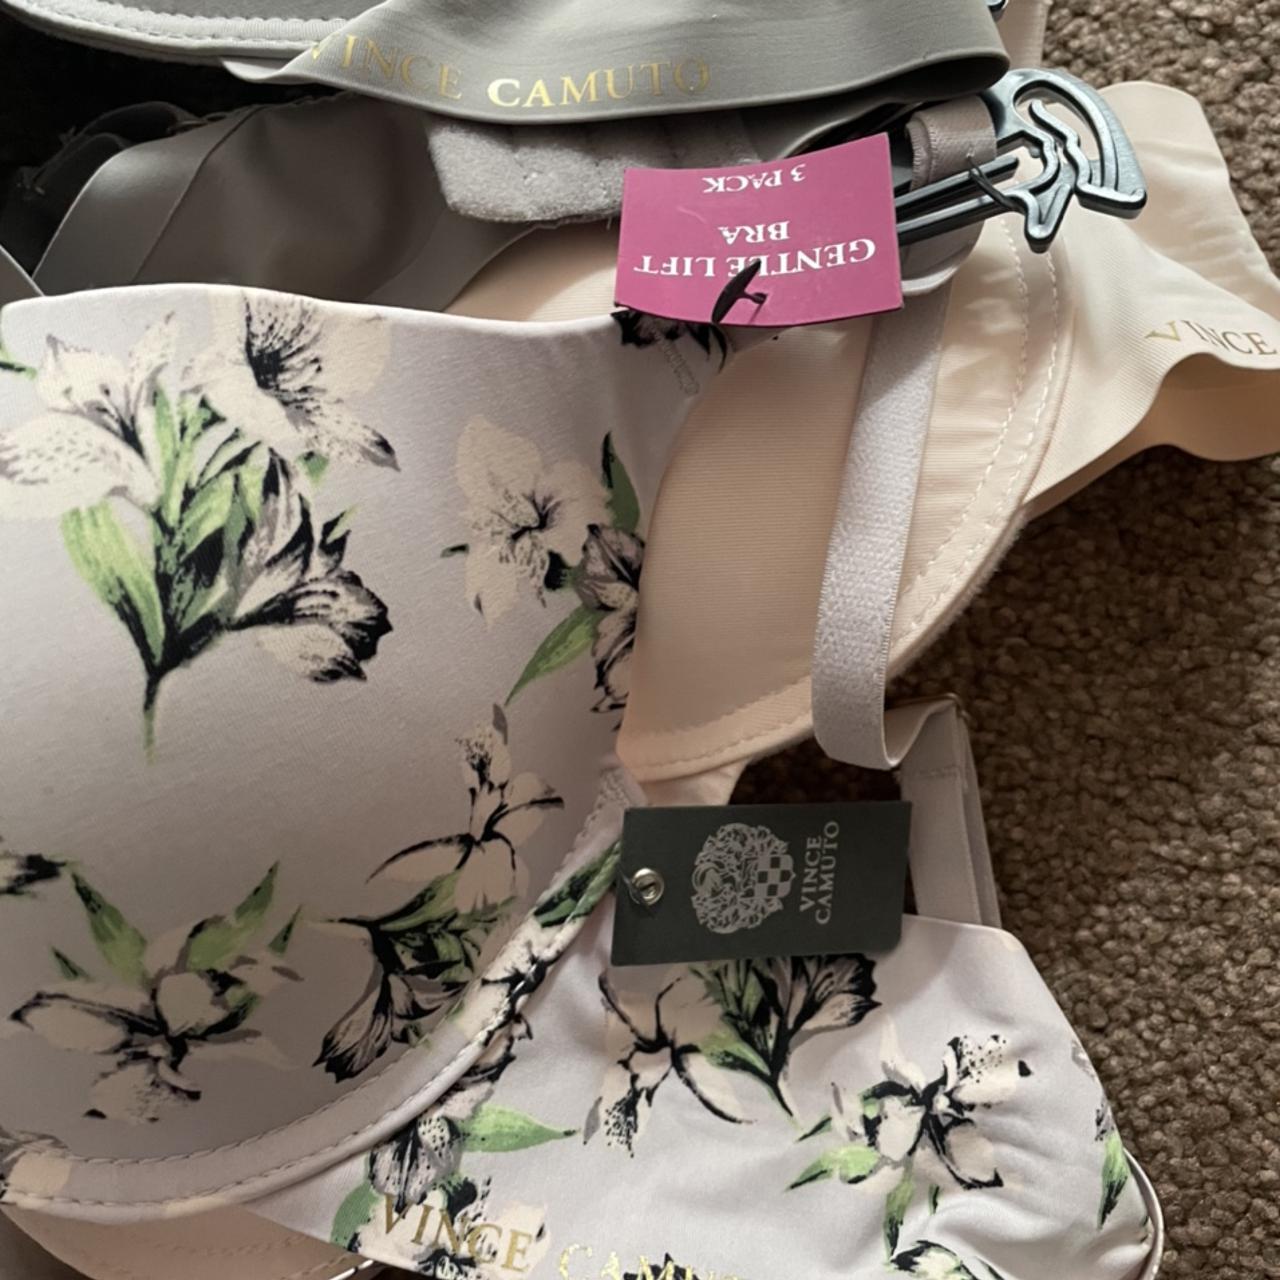 Vince camuto 3 pack bra set, brand new with tags. - Depop